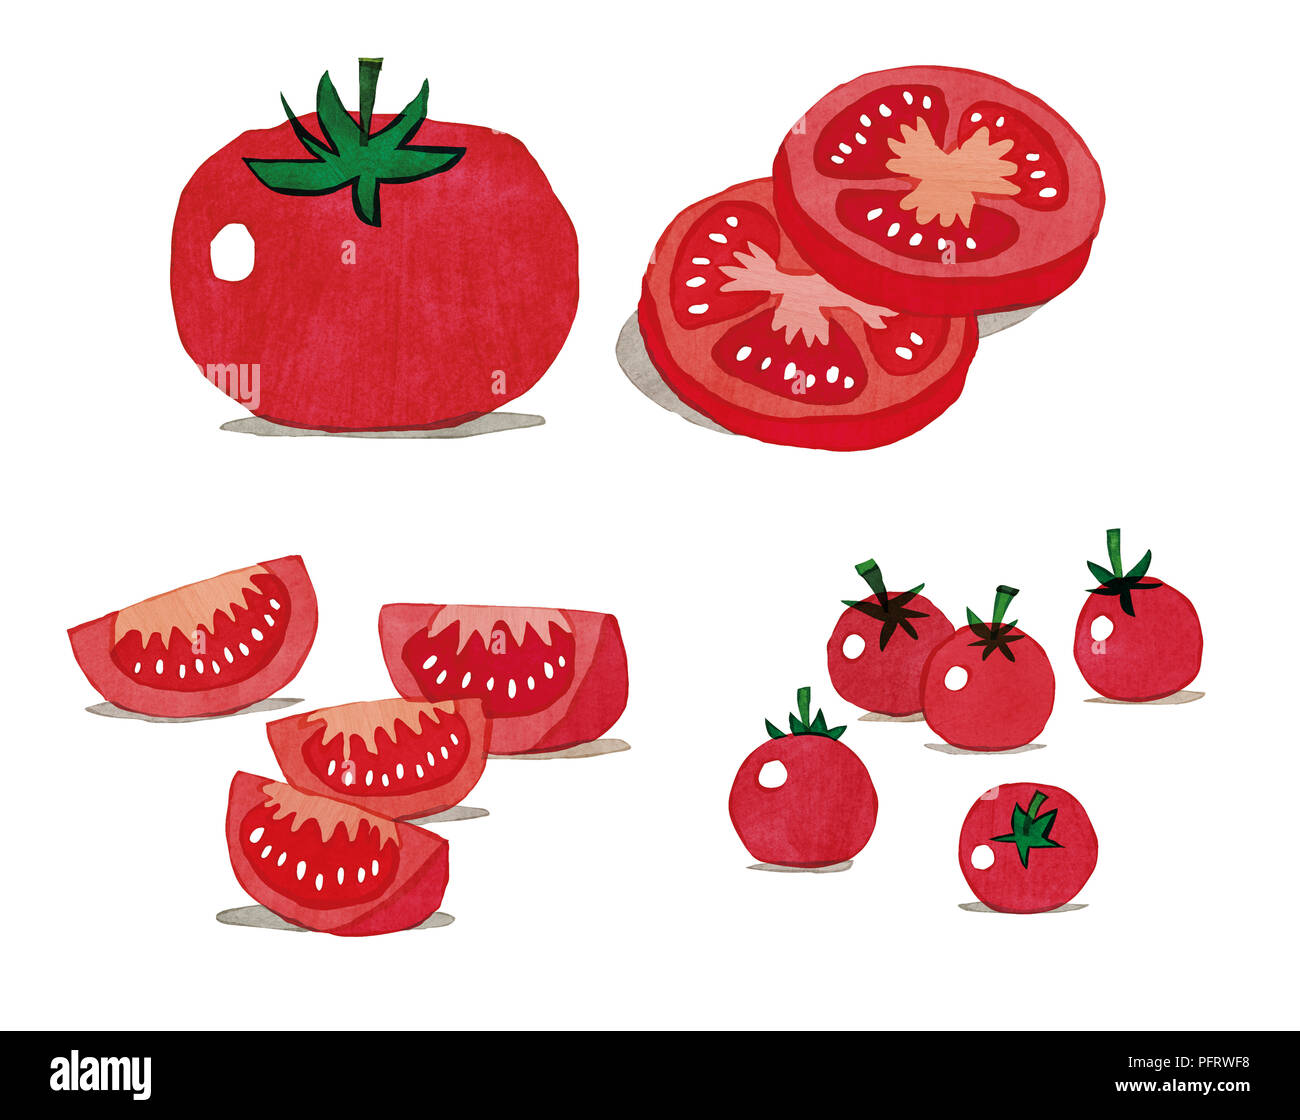 Illustration, Tomatoes, whole, sliced, and cherry tomatoes Stock Photo